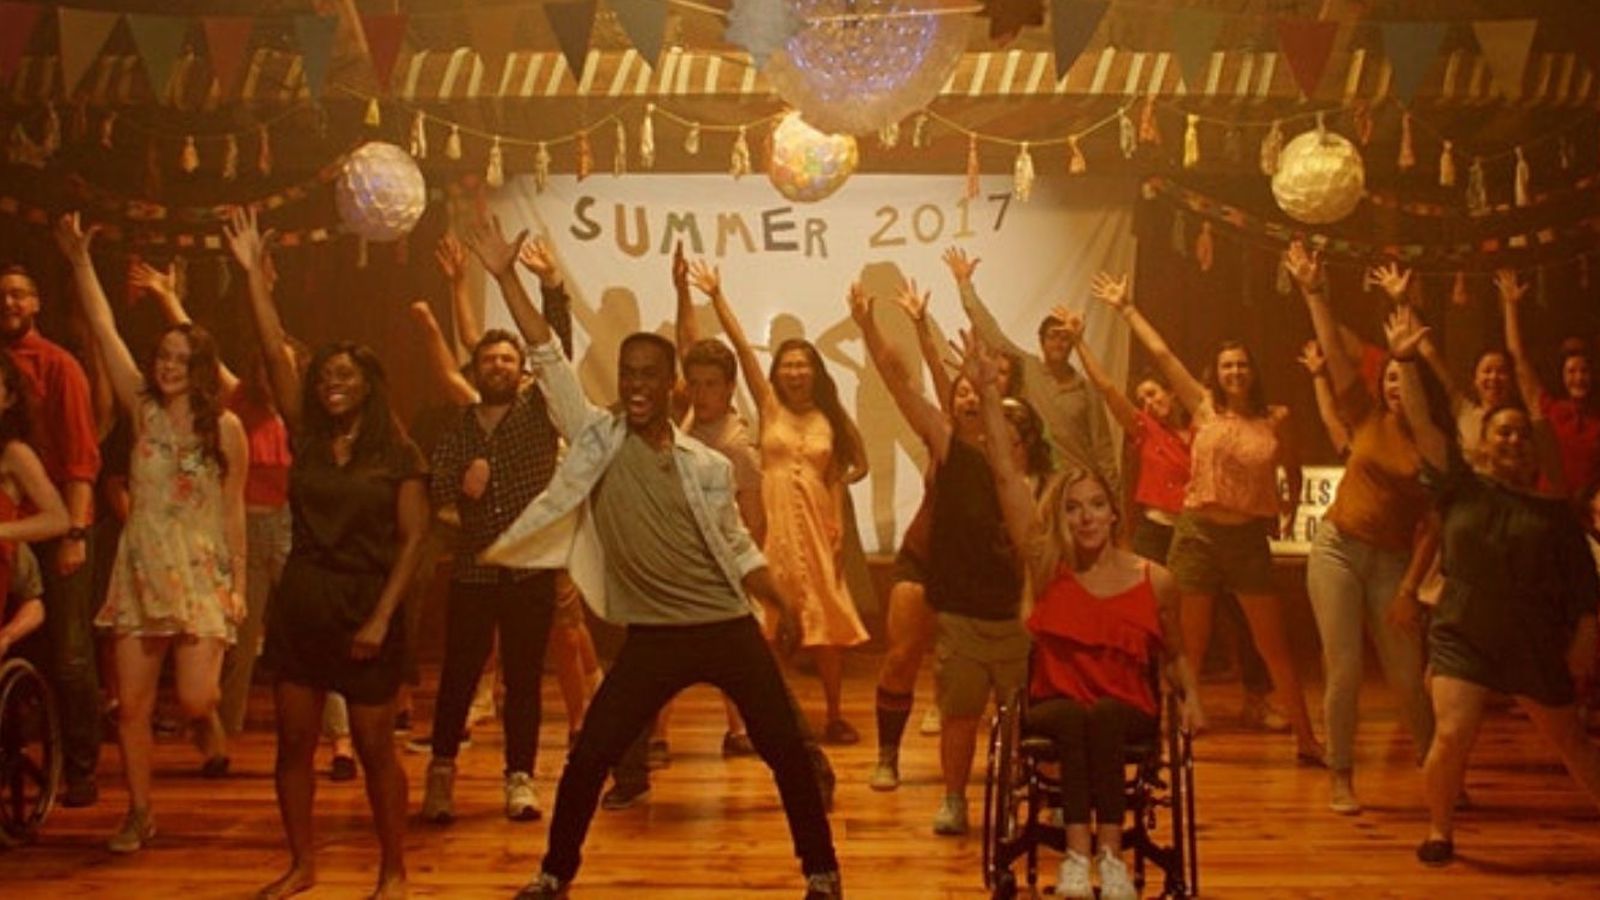 A school dance in front of a Summer 2017 banner, fronted by a boy standing on the left and a girl in a wheelchair on the right